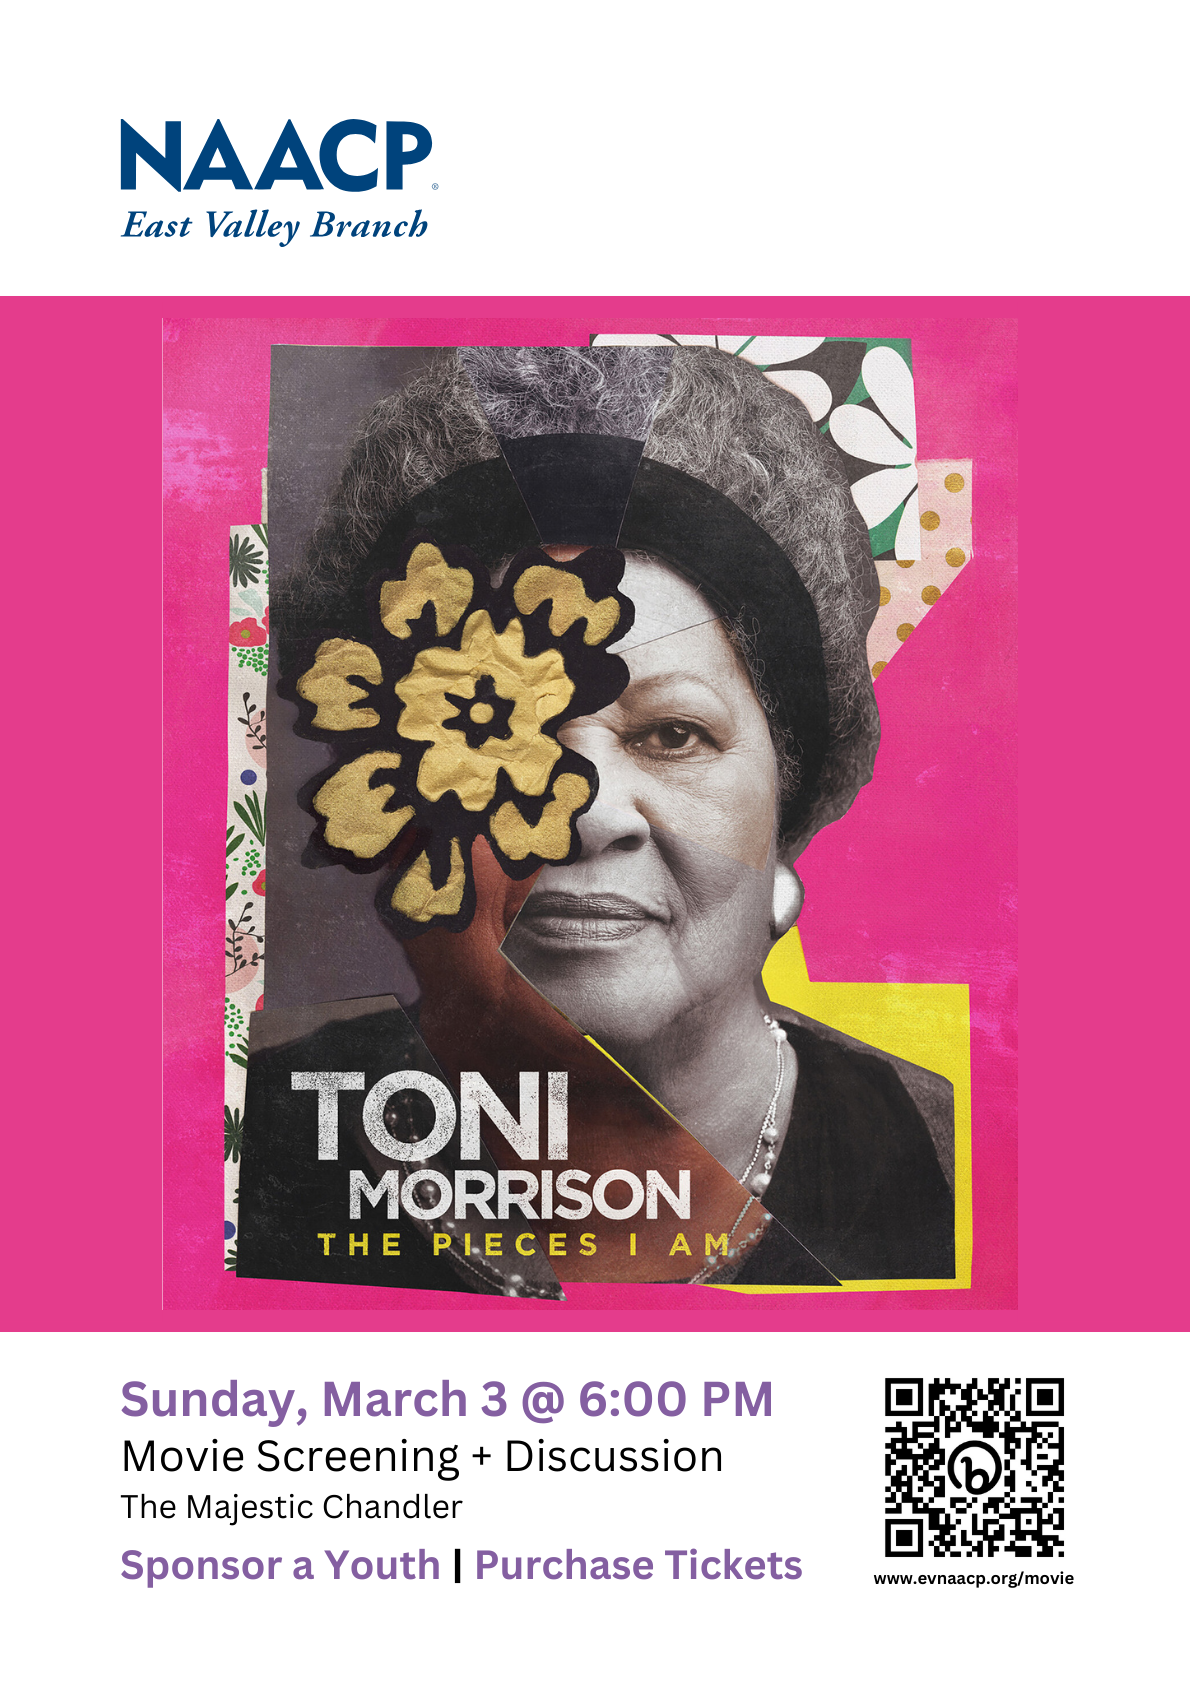 Toni Morrison The Pieces I Am Movie Screening and Discussion Sunday, March 3 at 6:00 PM at the Majestic Chandler Sponsor a Youth and Purchase tickets for yourself at www.evnaacp.org/movie